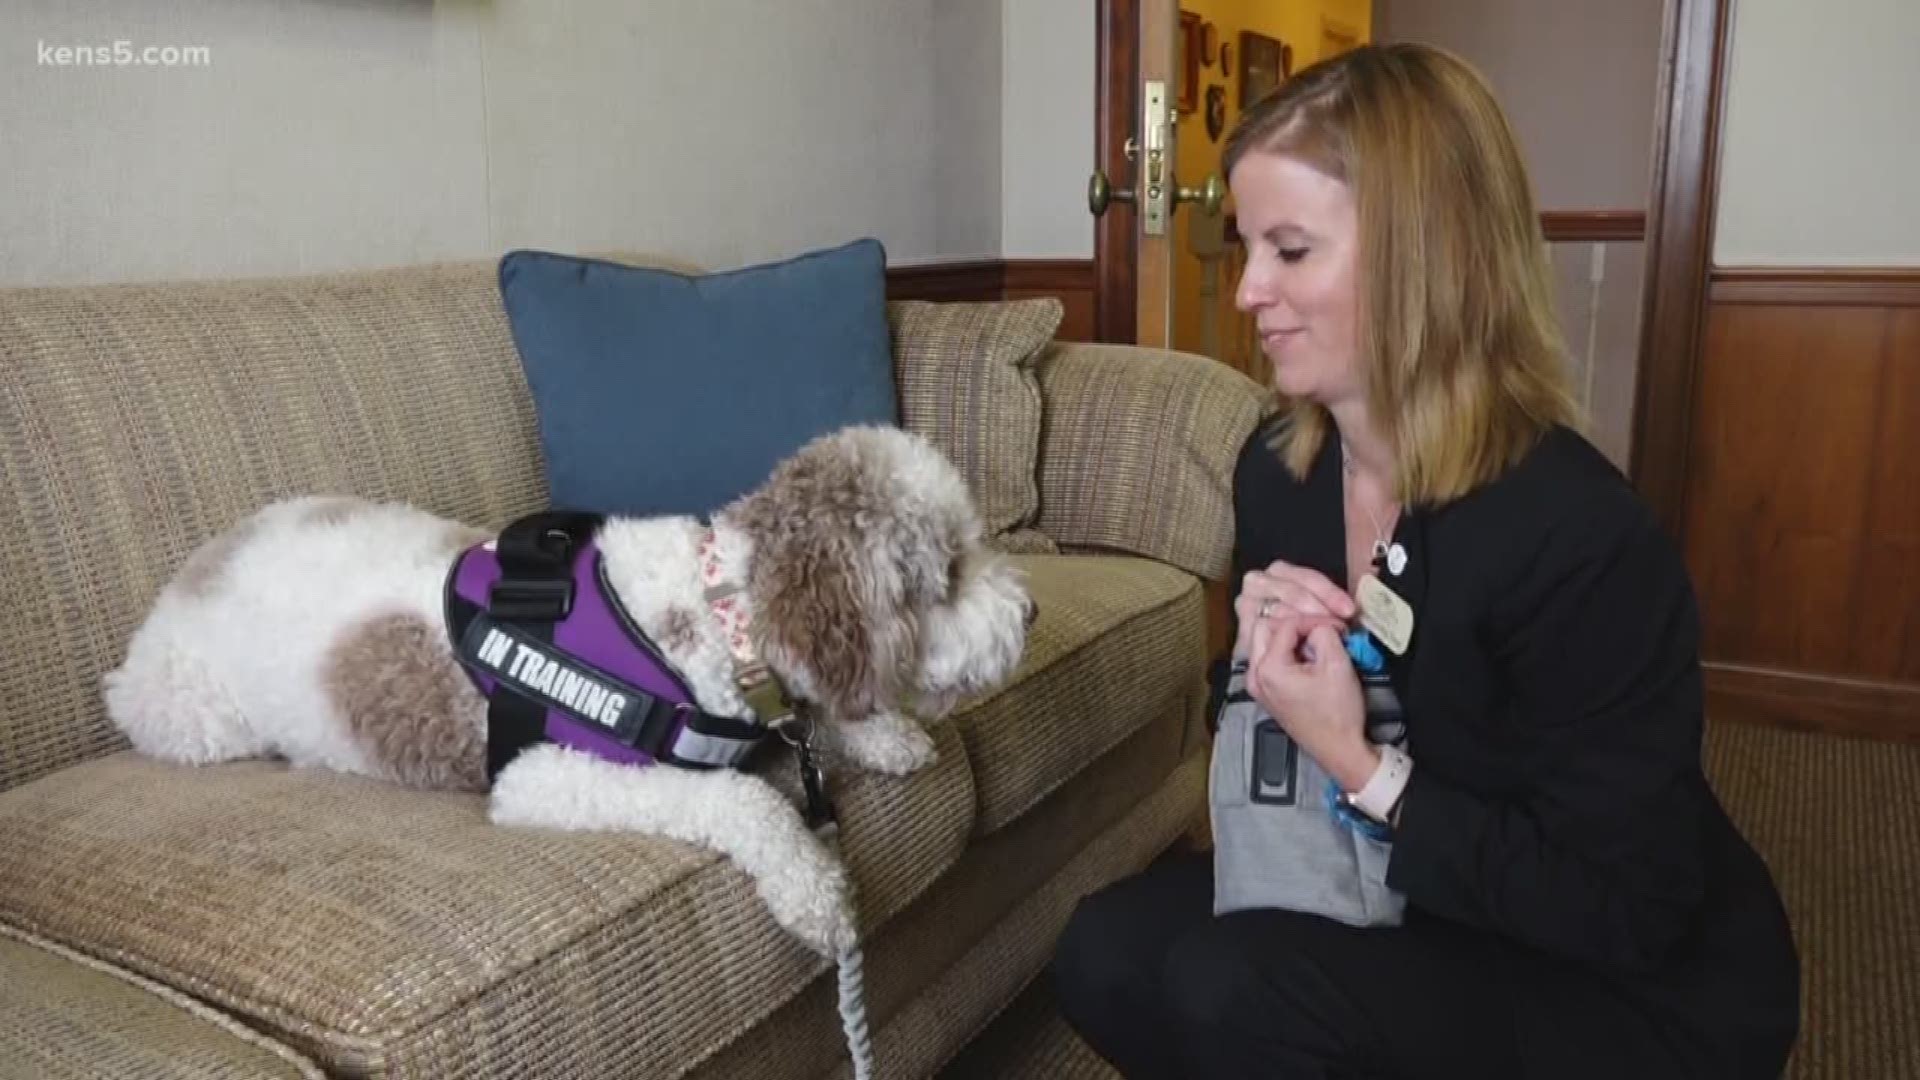 Porter Loring Mortuaries has a four-legged staff member that's dedicated to help families in their time of grief.